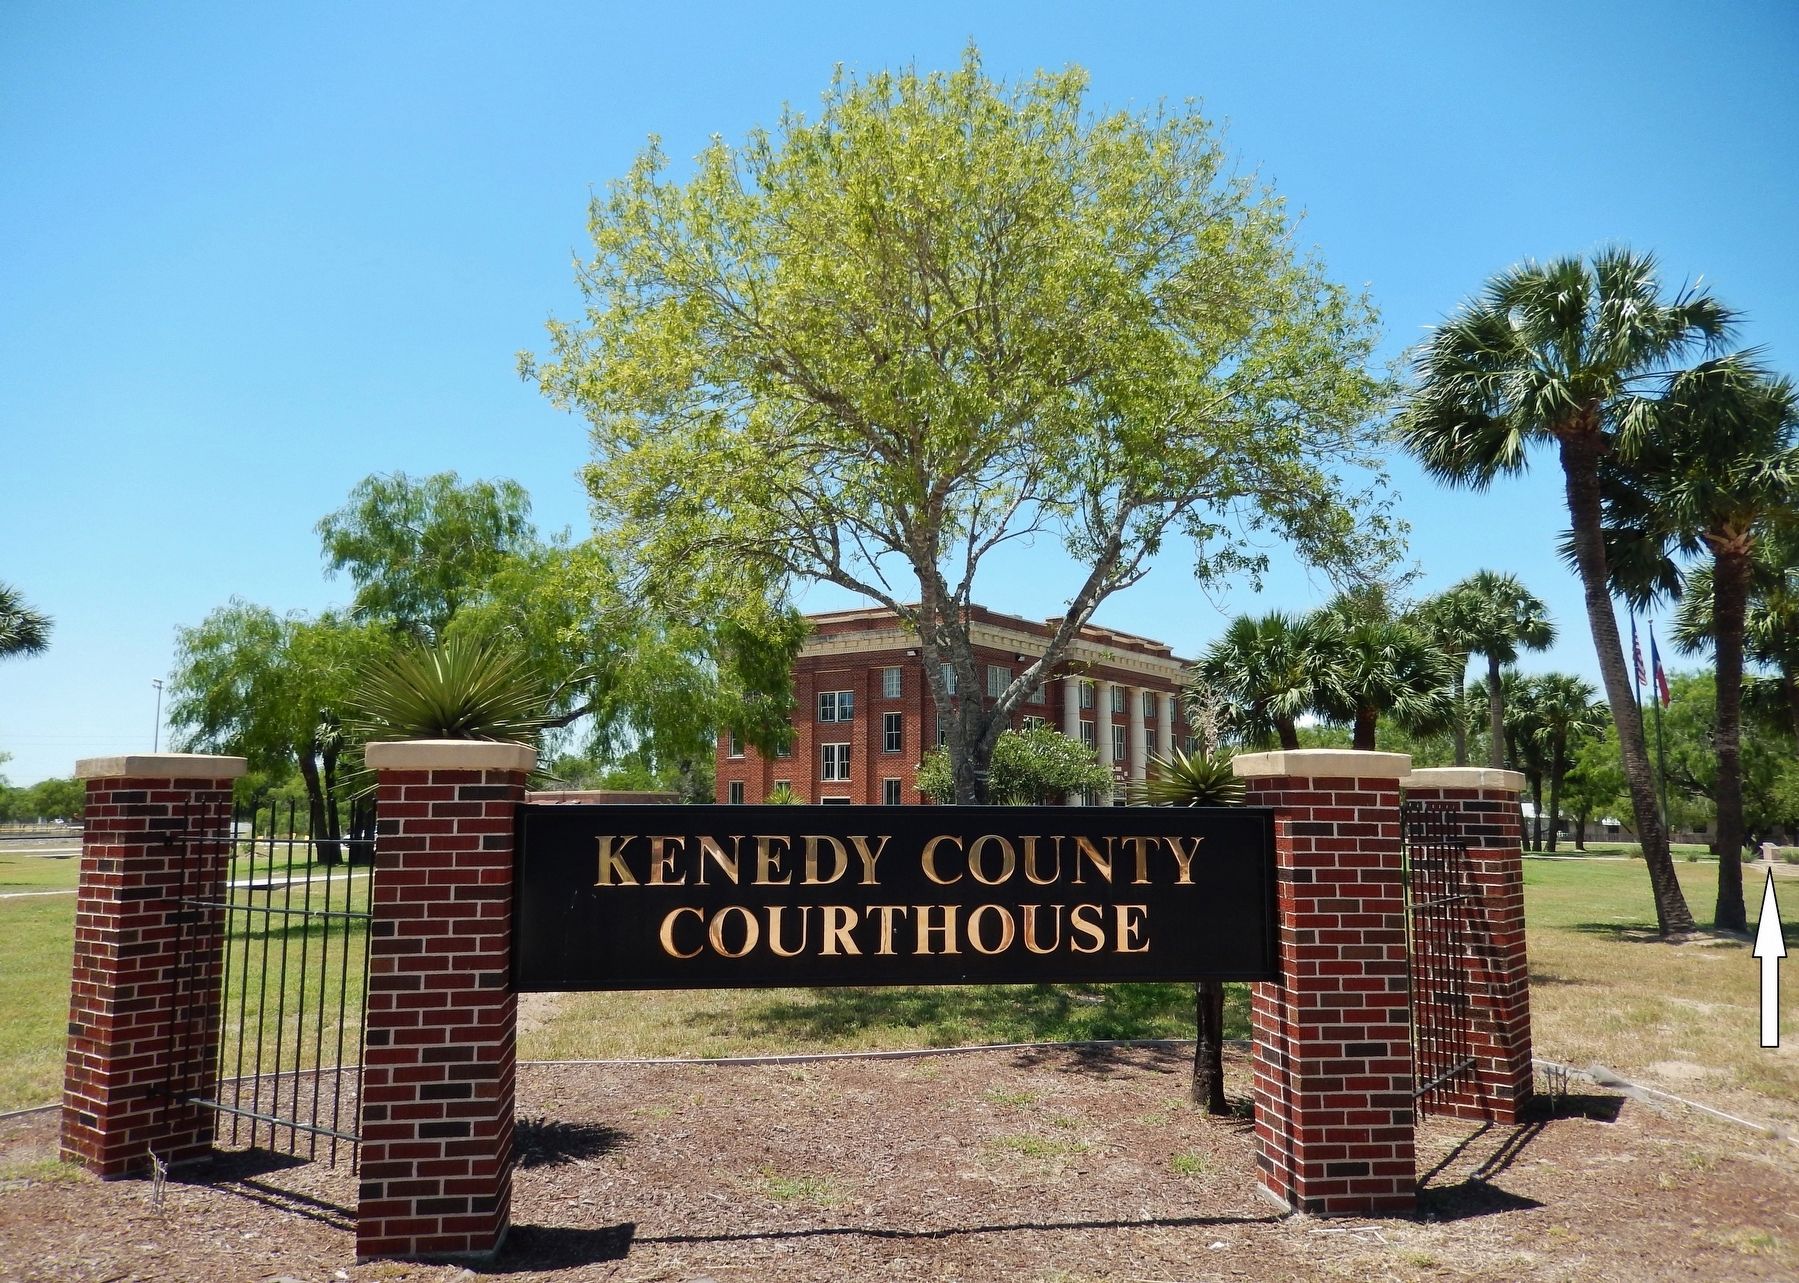 Kenedy County Courthouse (<i>southeast corner view; marker visible in background, right edge</i>) image. Click for full size.